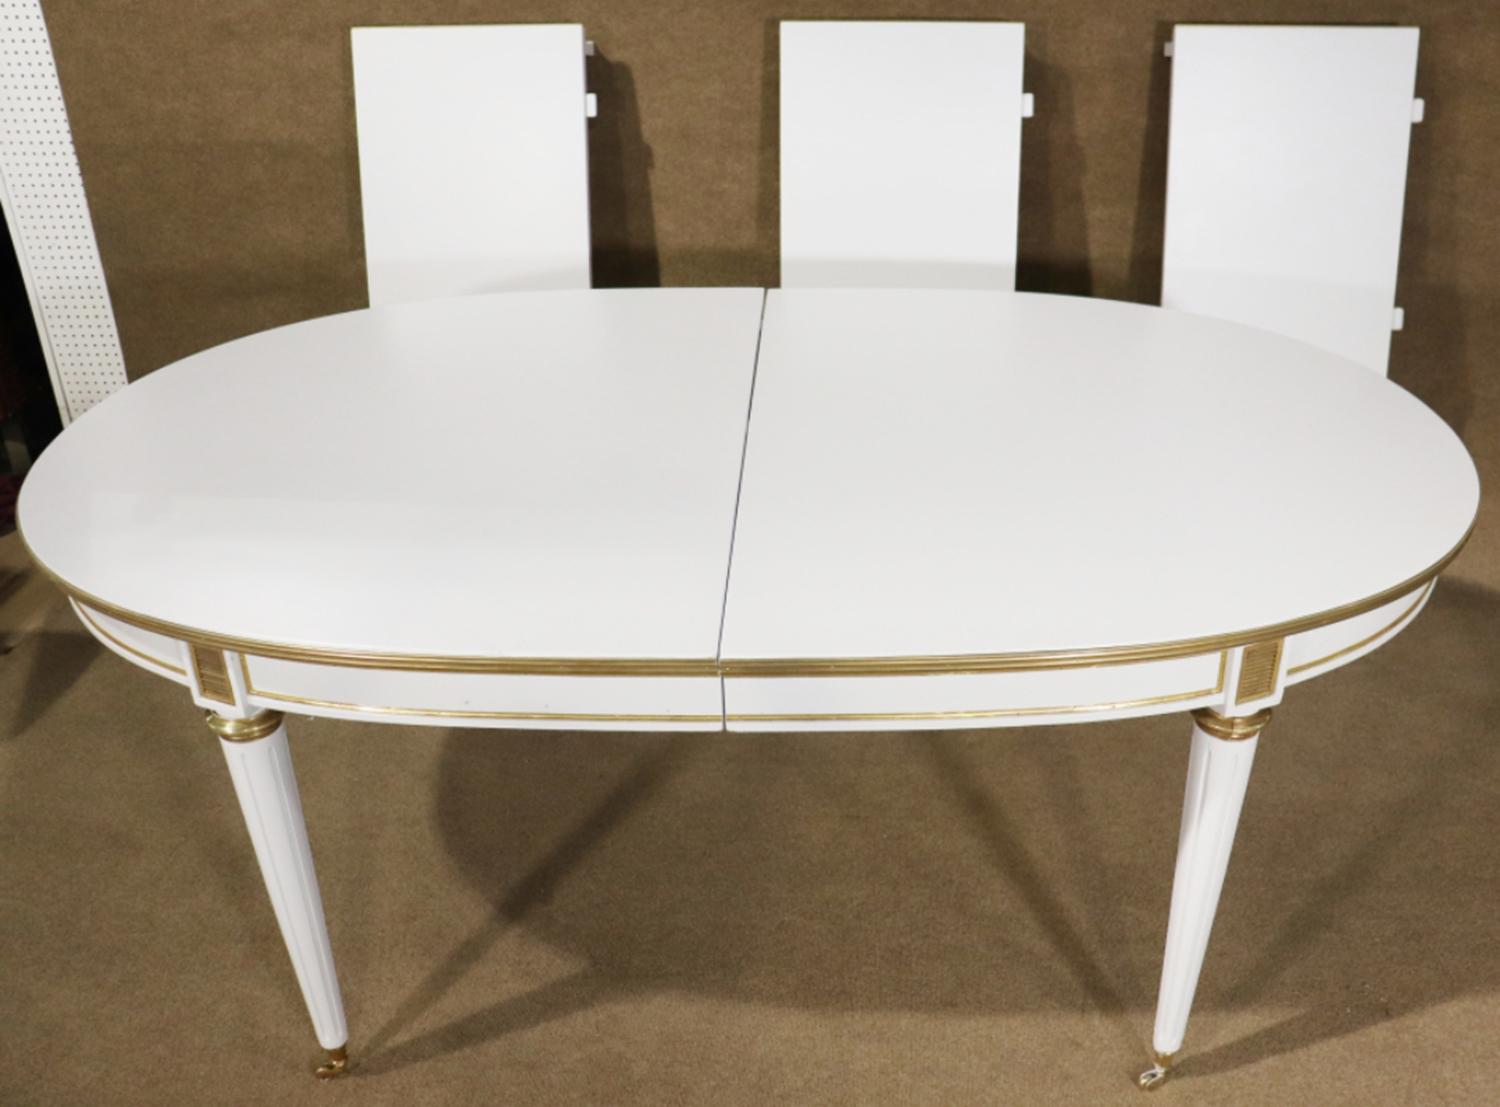 Directoire Manner of Maison Jansen White Lacquer Bronze Mounted Dining Table 3 Leaves  For Sale